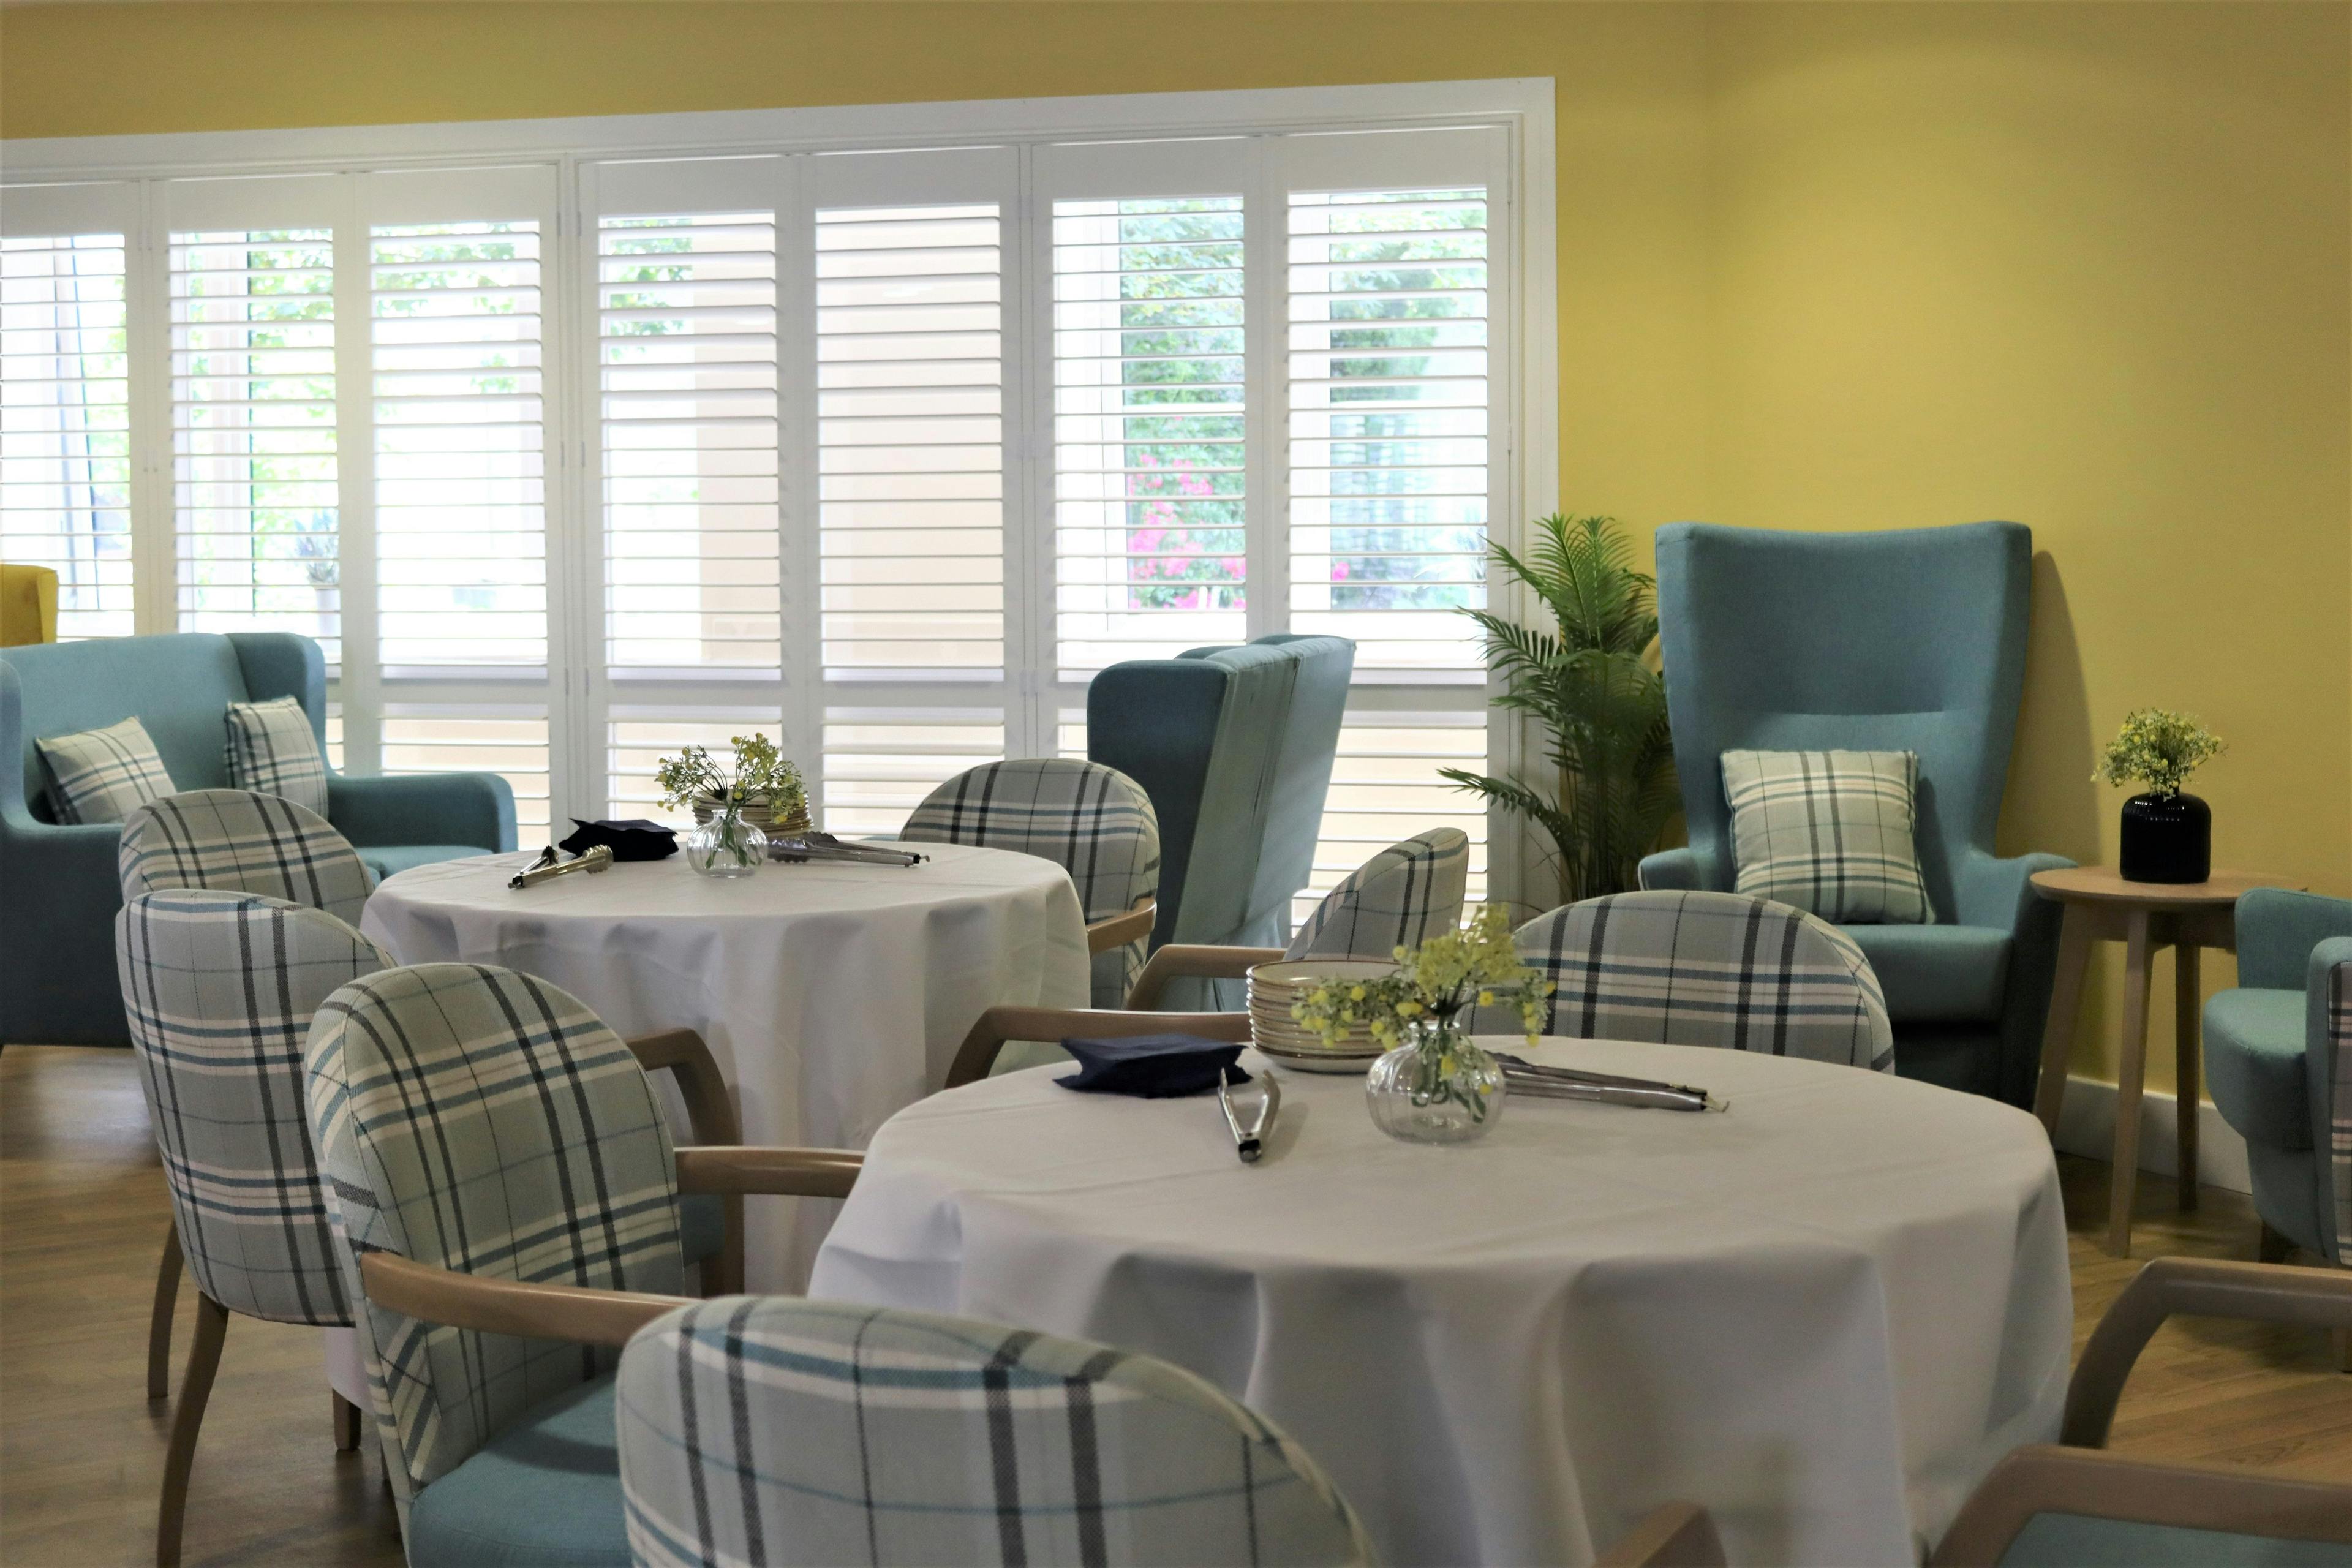 Dining room of Lynwood care home in Ascot, Berkshire